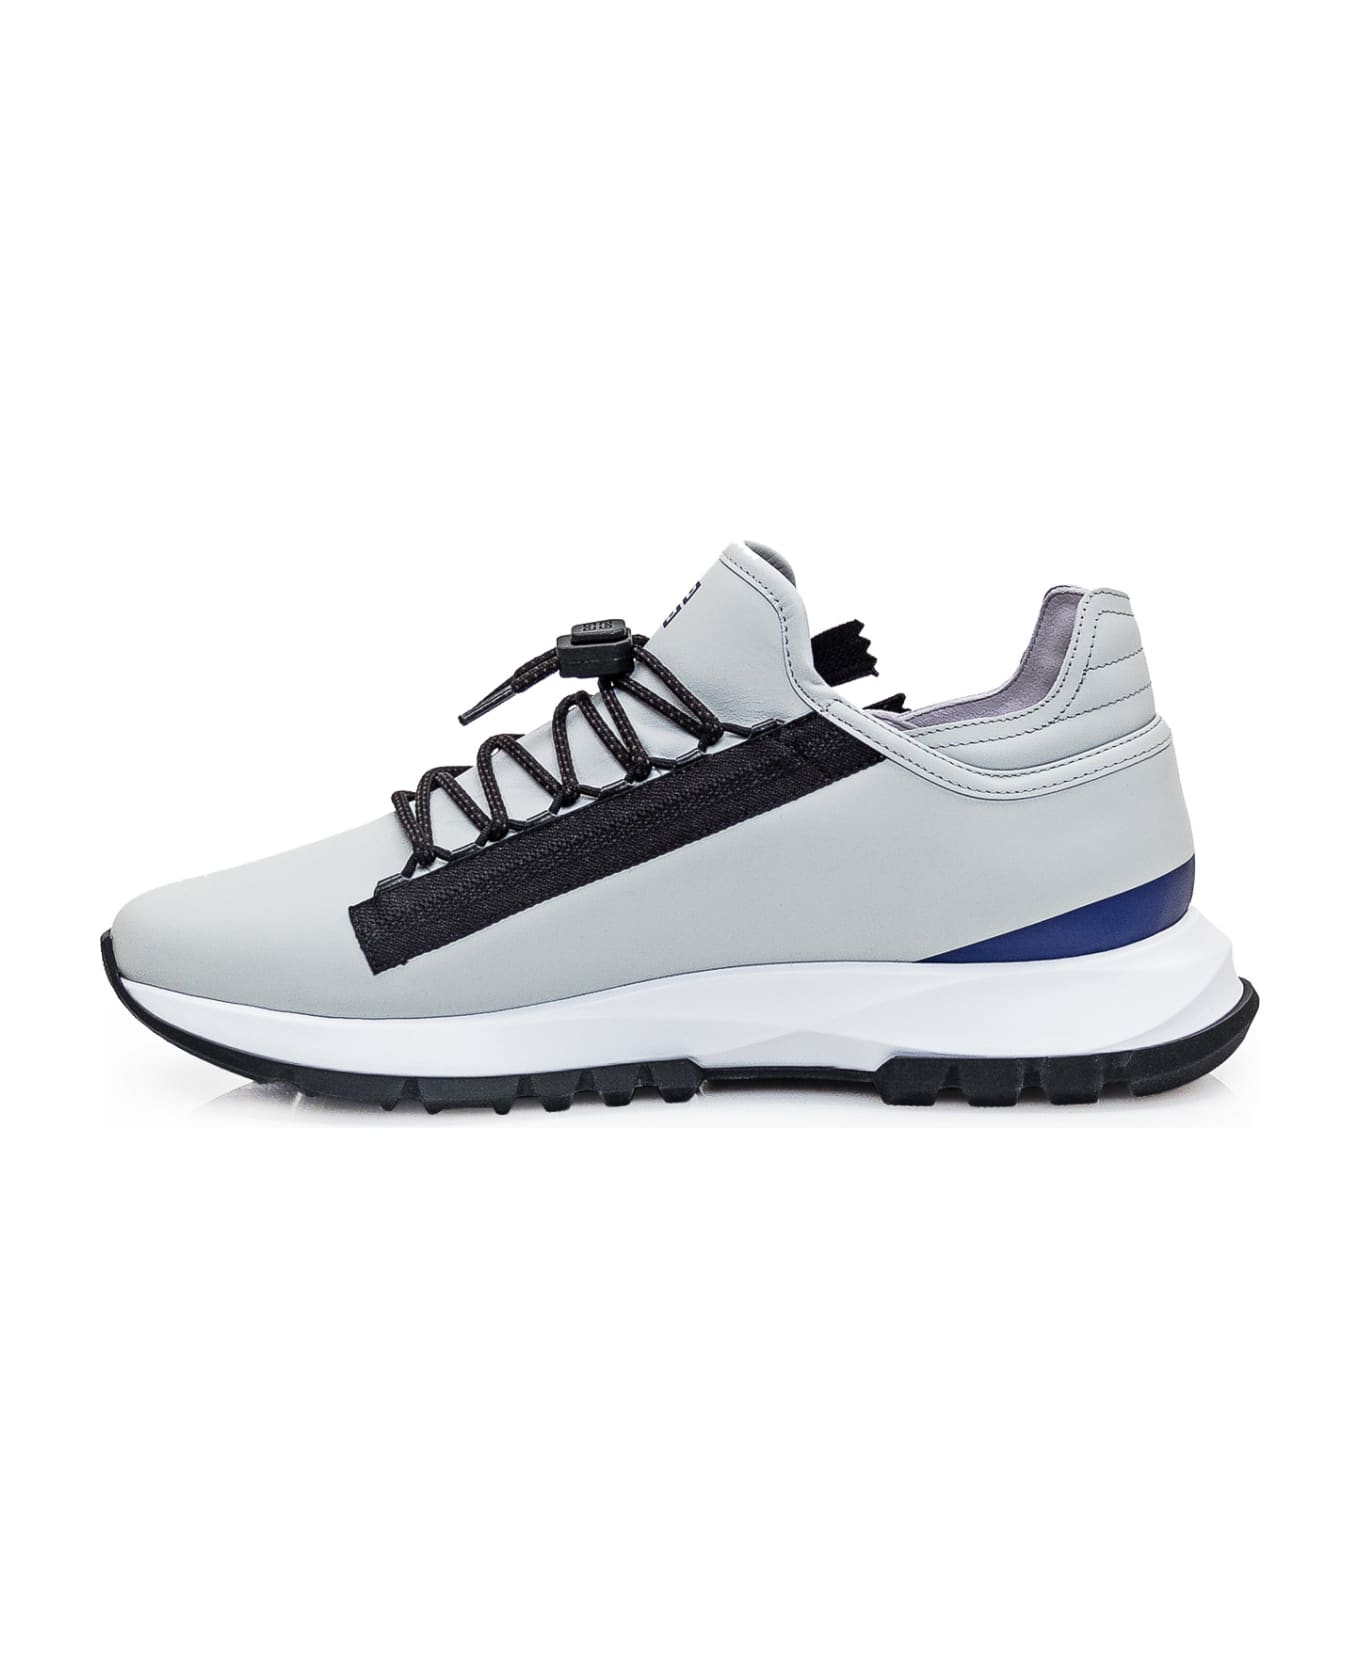 Givenchy Spectre Running Sneaker - GREY BLUE